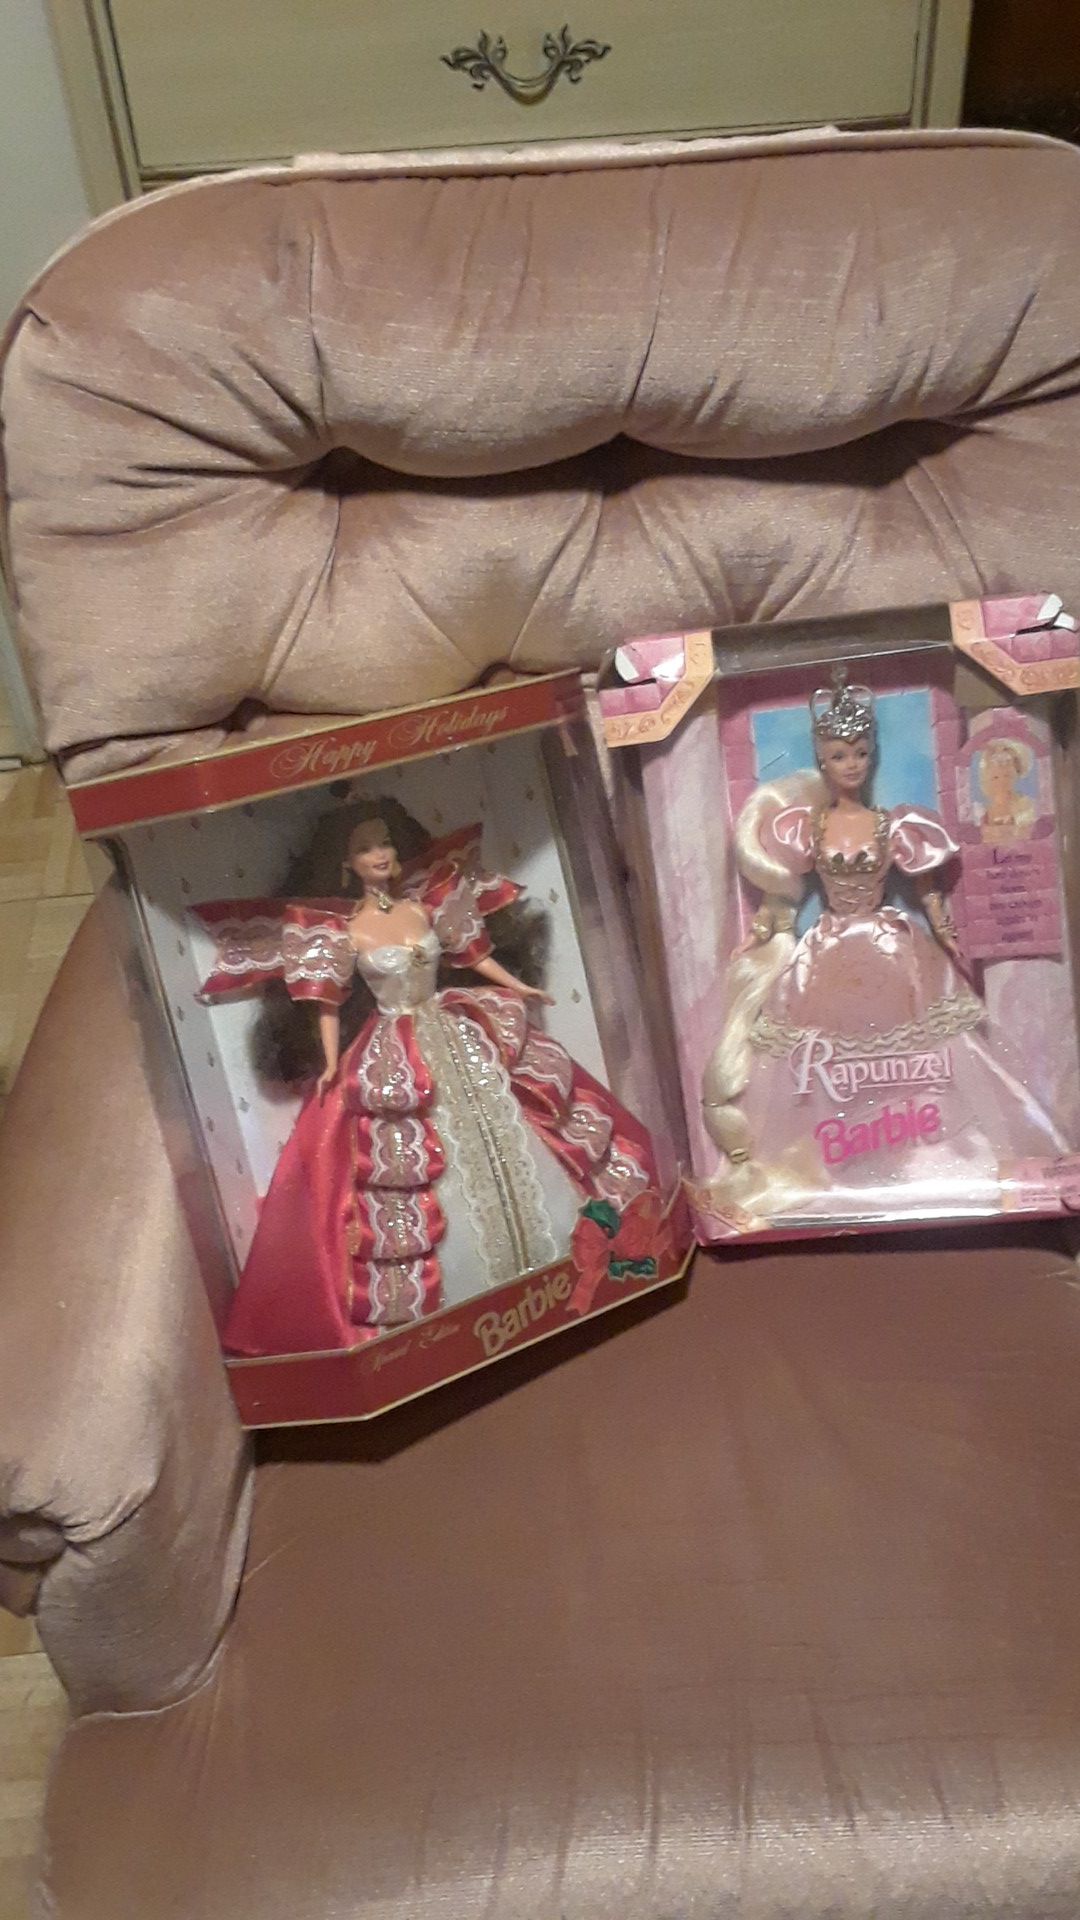 Holiday and Rapunzel collector Barbie's